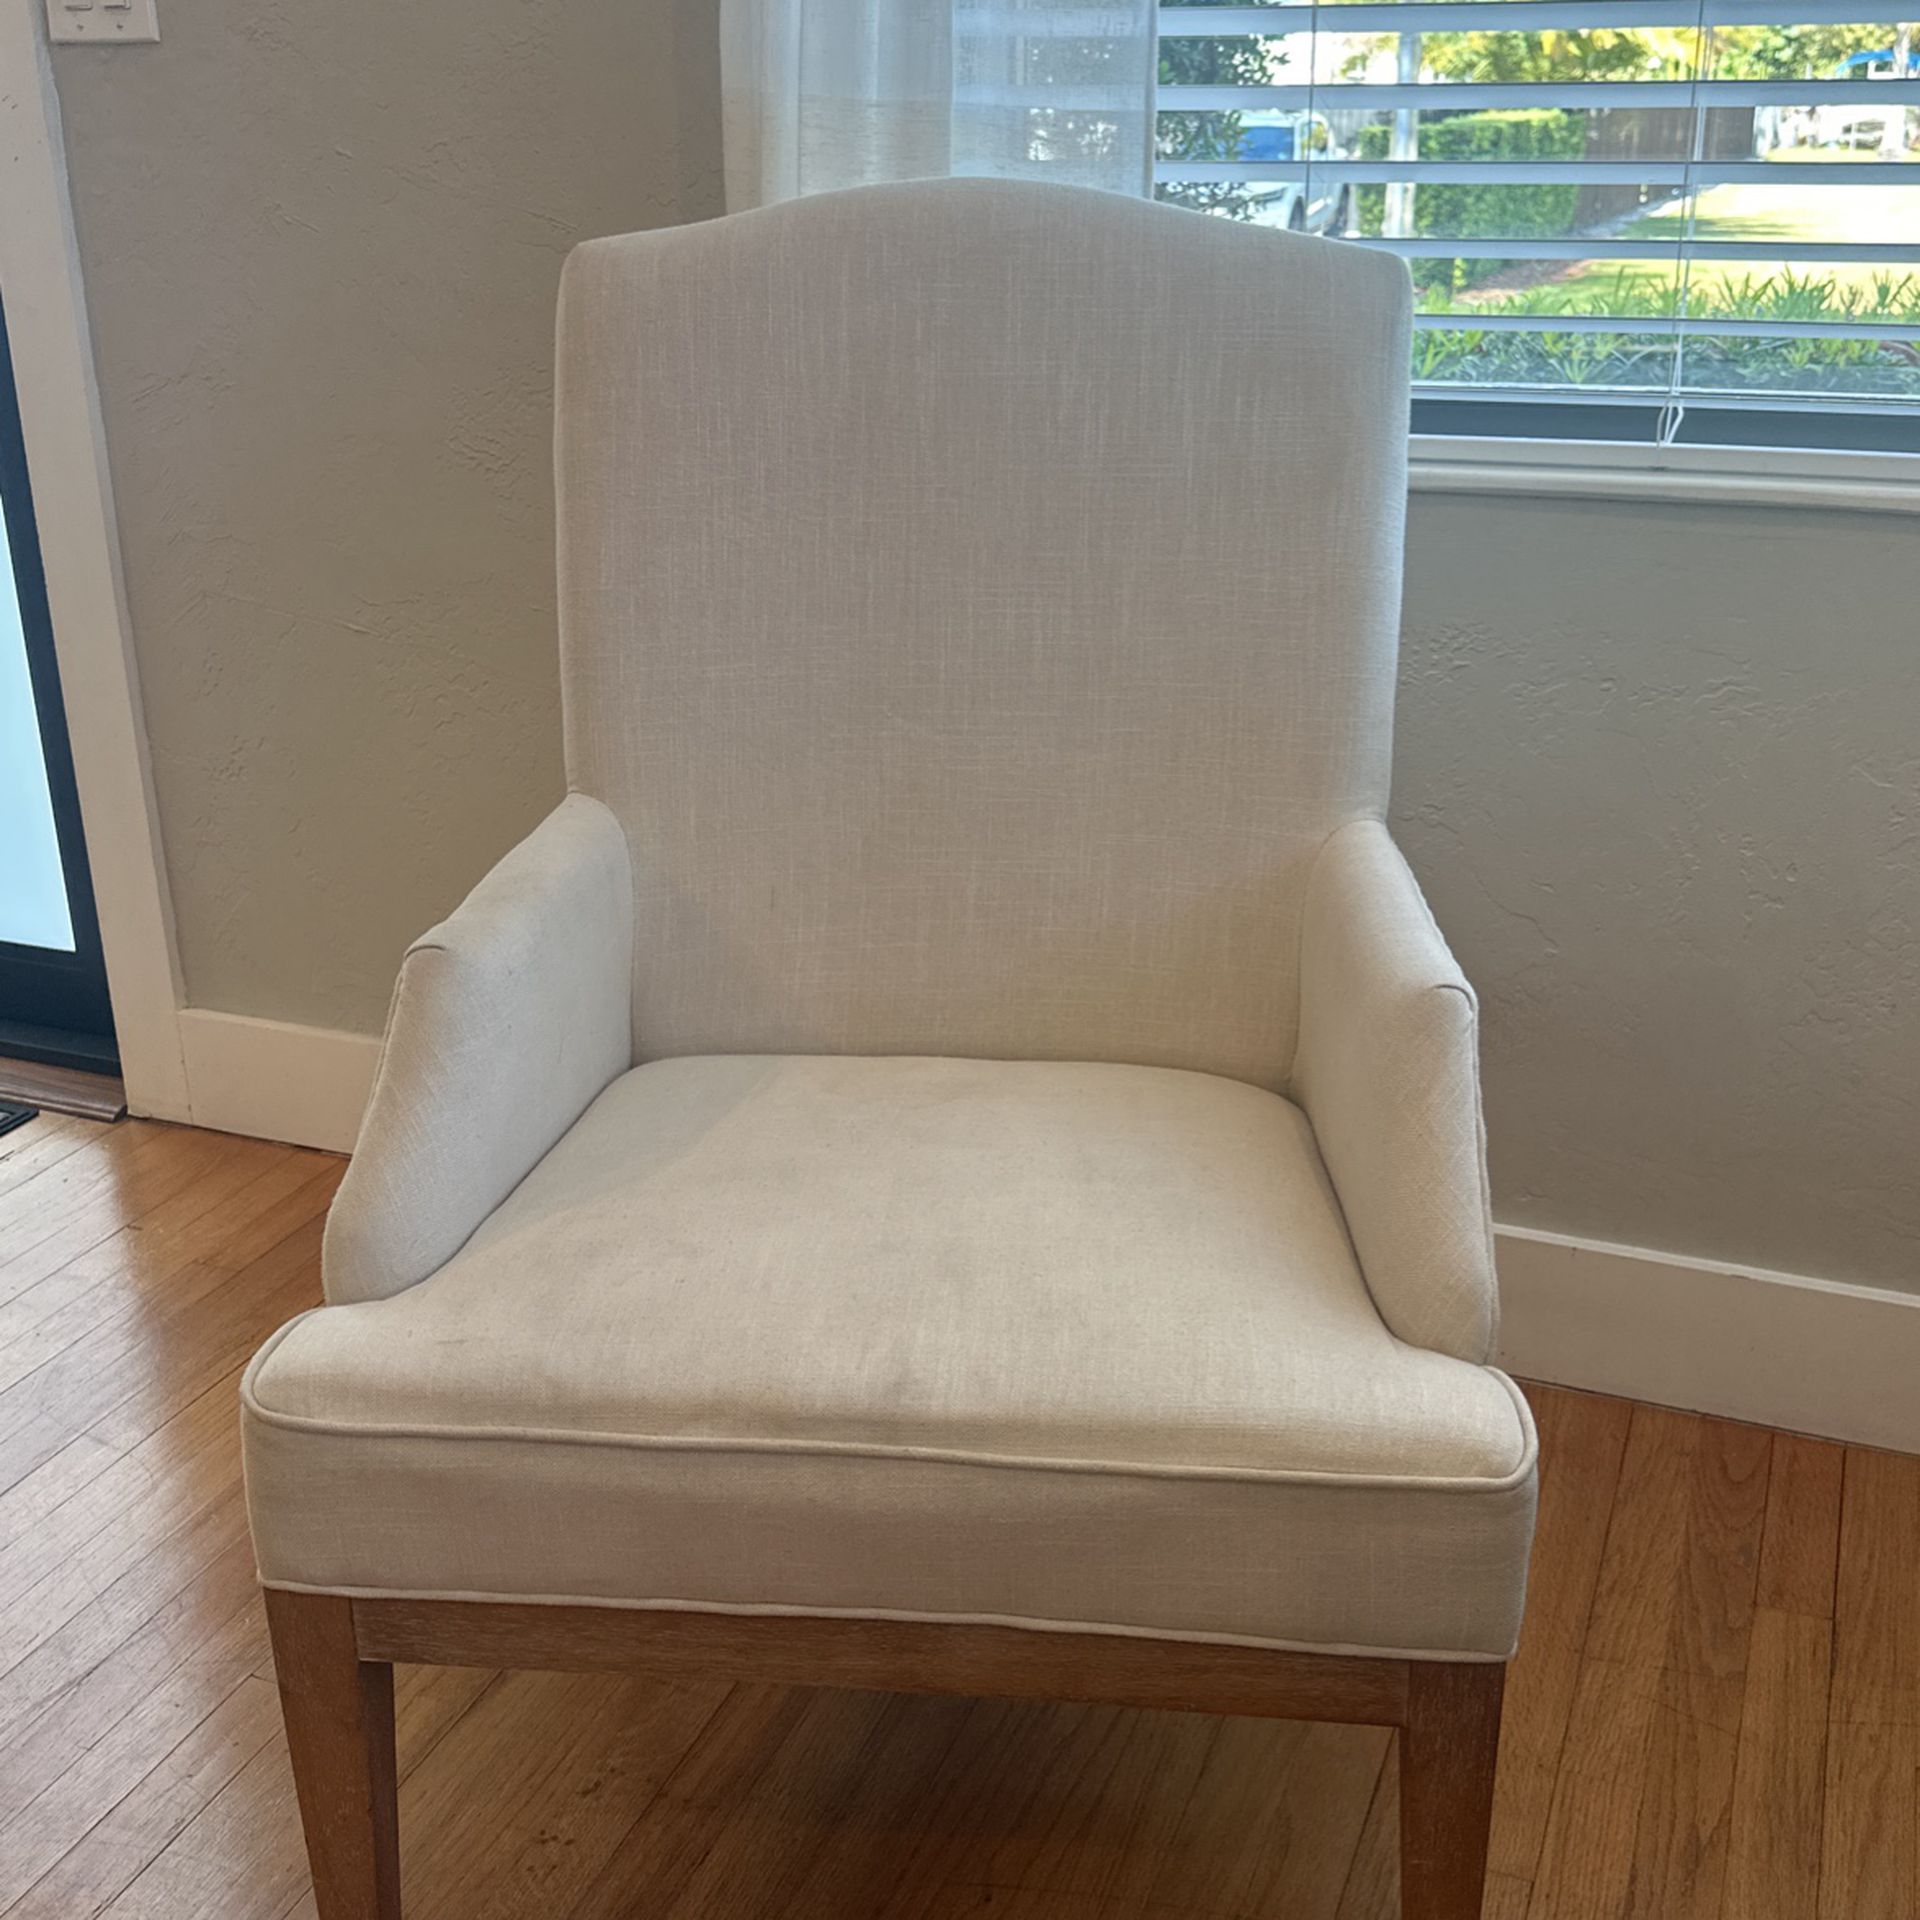 Beige Fabric Arm Chair With Wooden Base